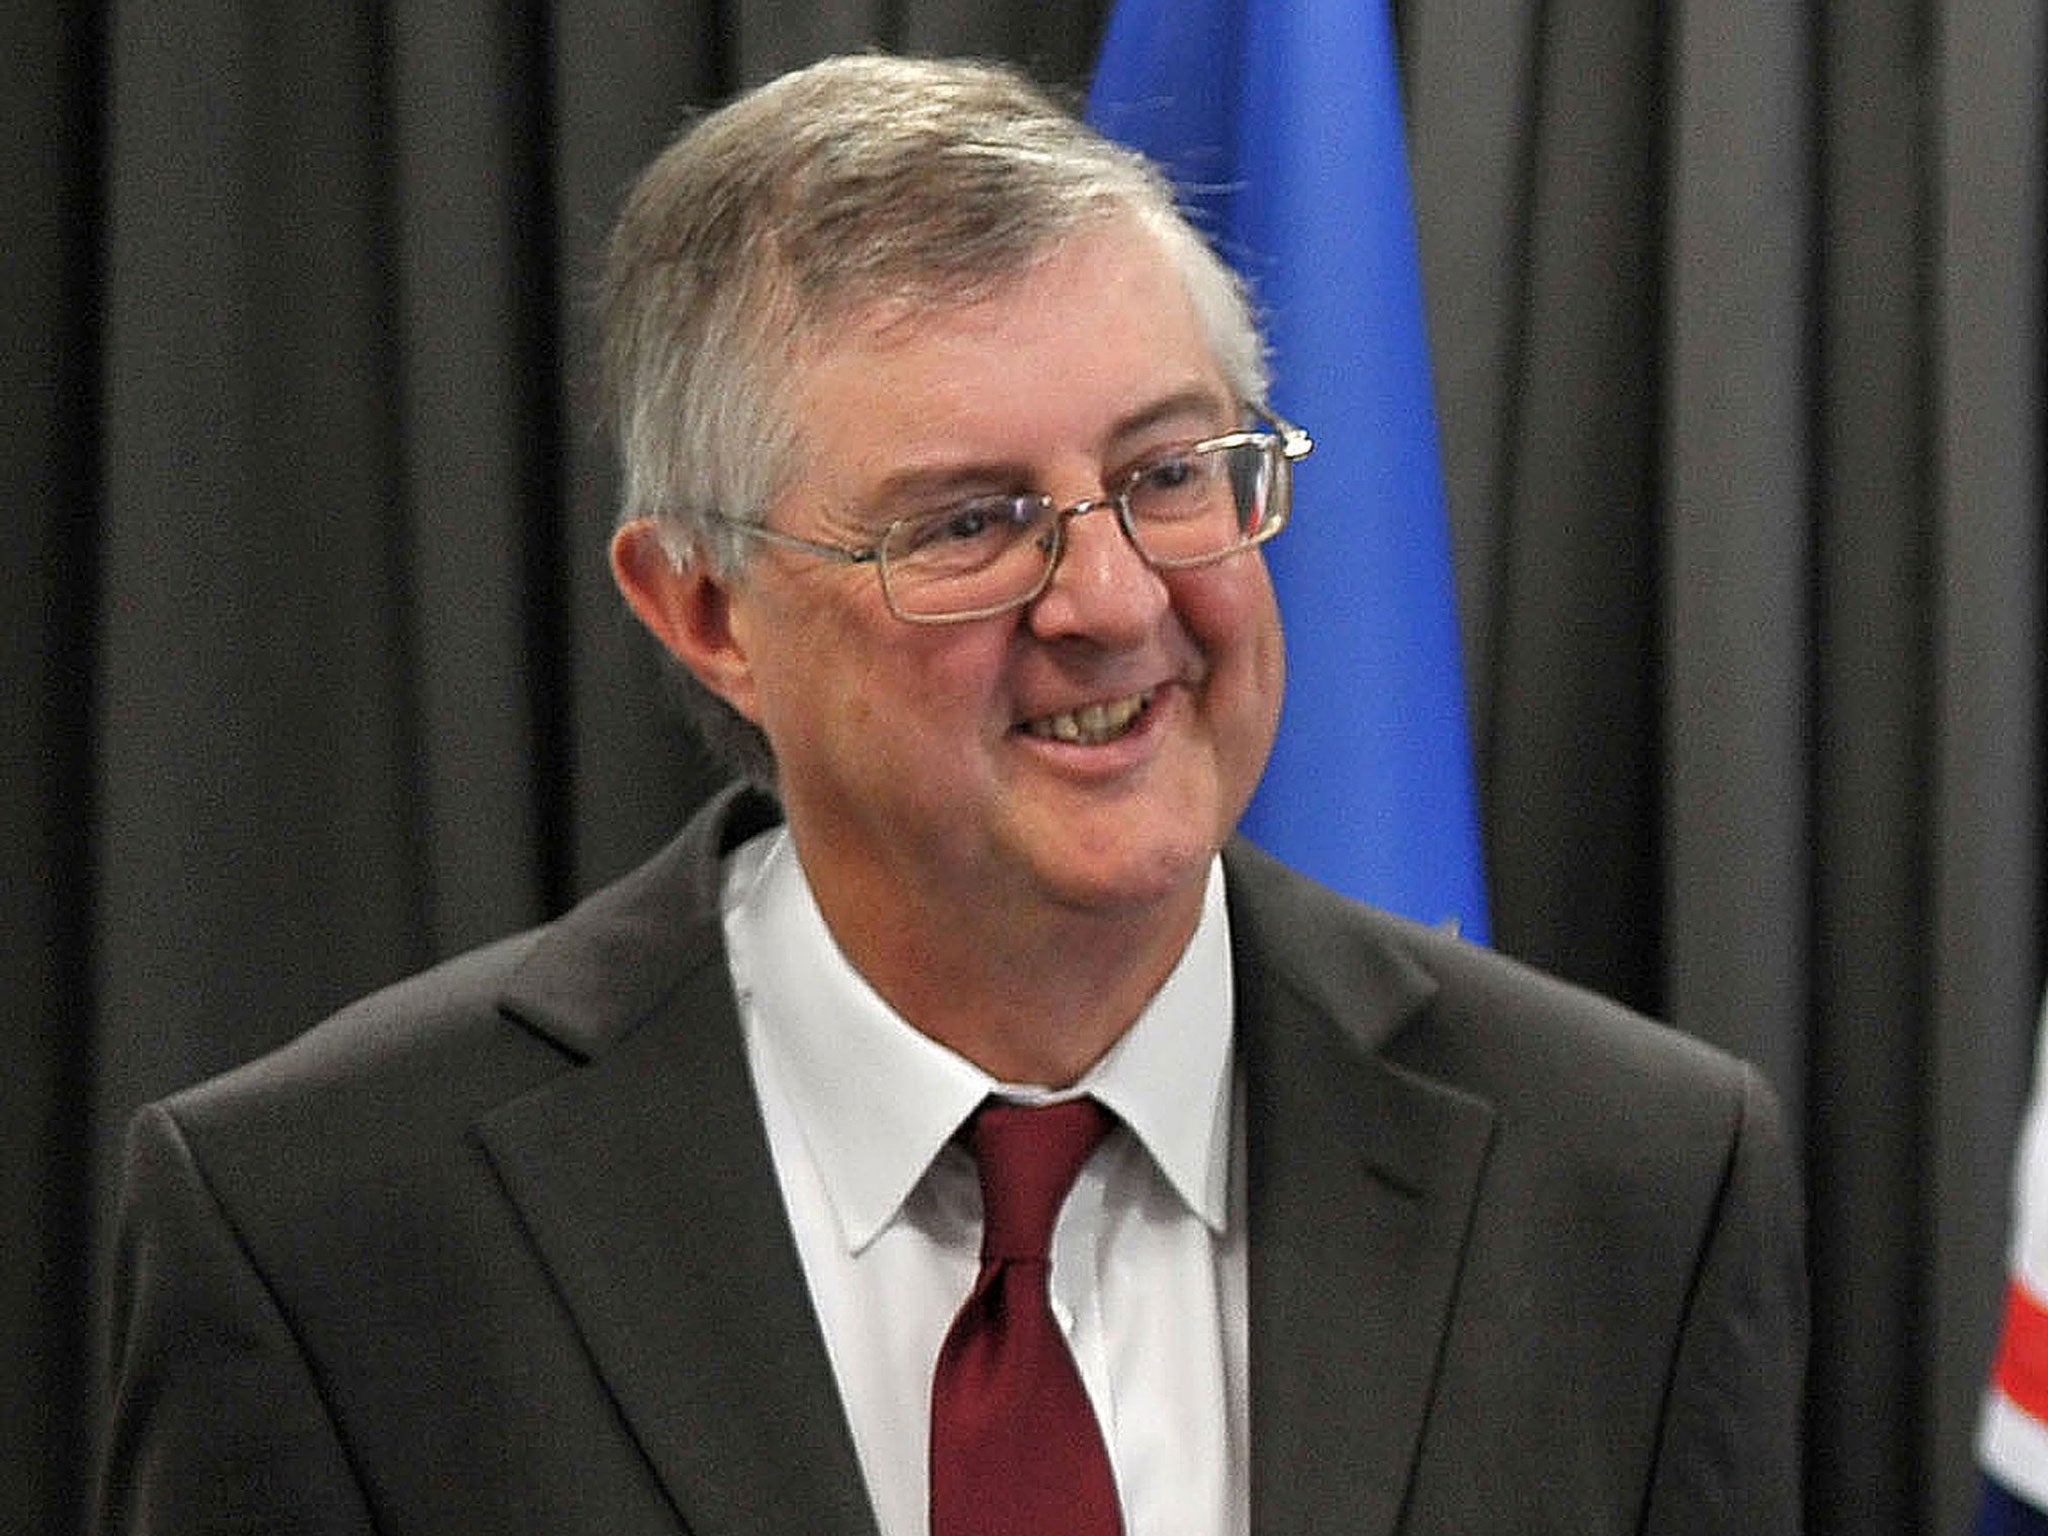 Mark Drakeford: The health service in Wales is 'careful, compassionate, and provides an excellent services for Welsh patients'